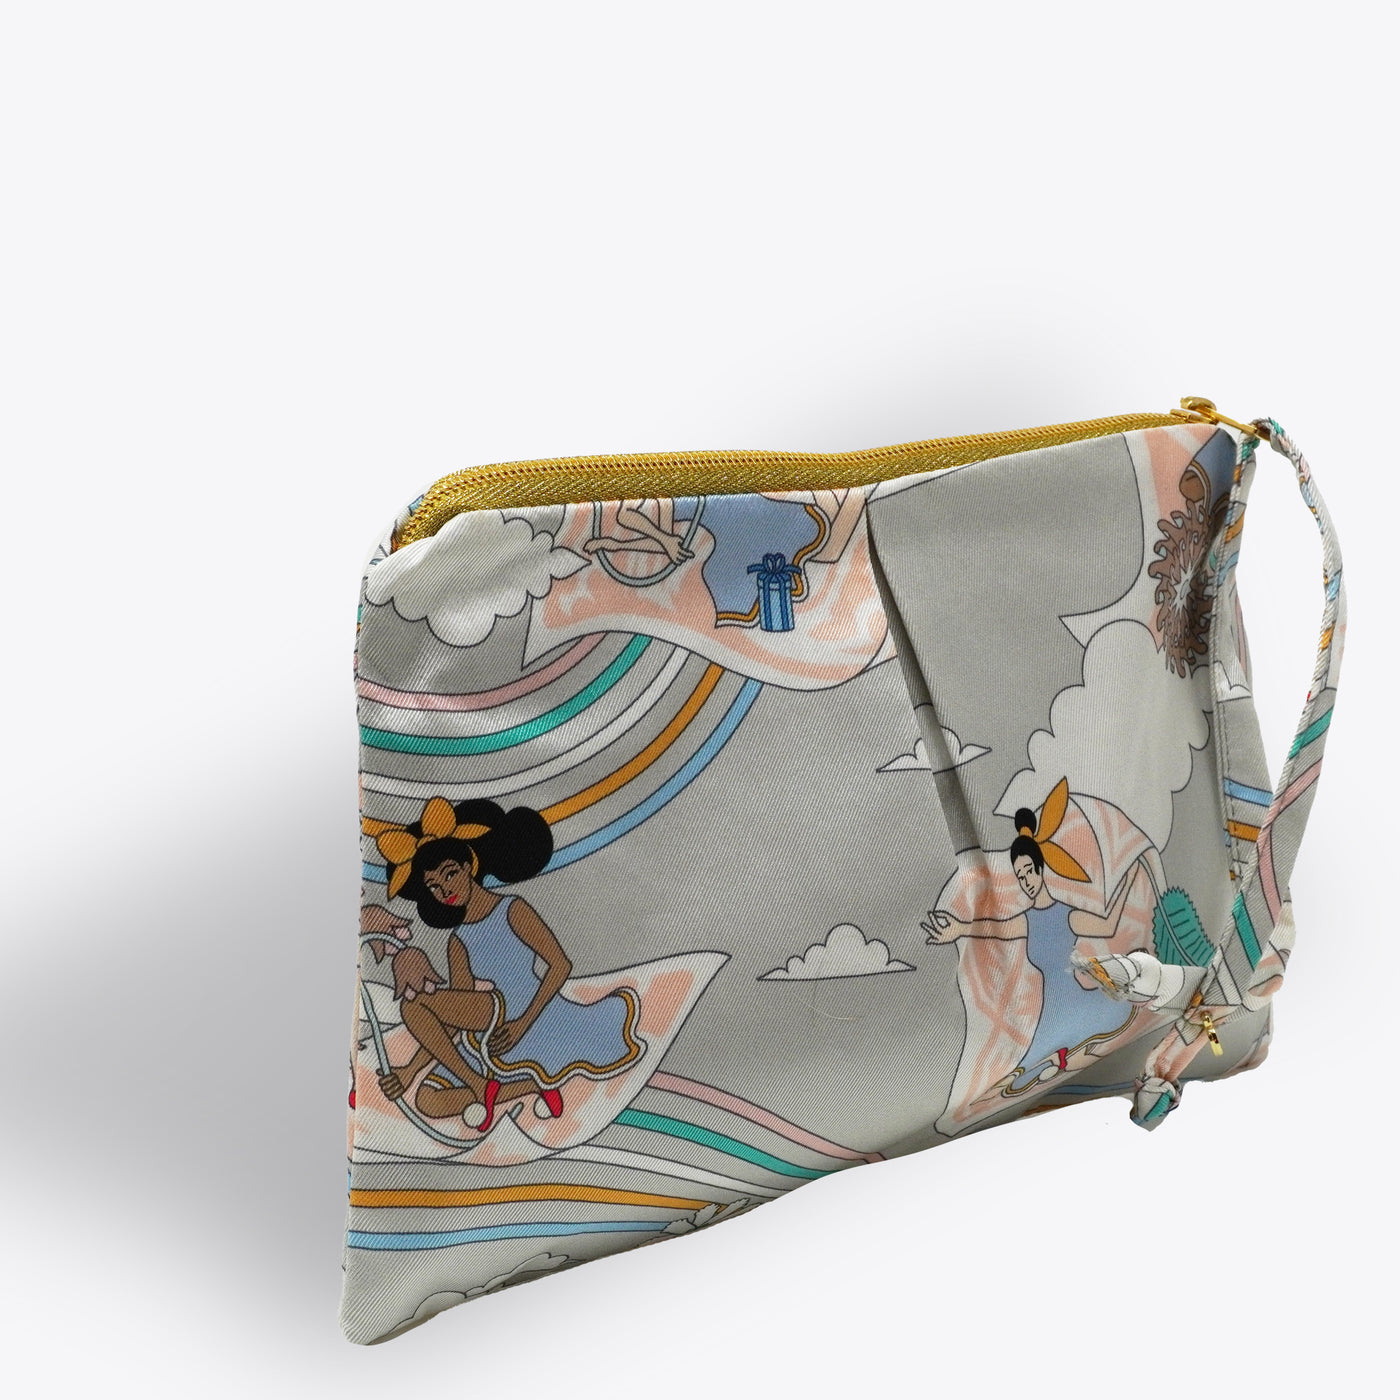 "Carres Volantes" Scarf Bag (Upcycled from Hermes Scarf) Party Clutch Hampton Road Designs   